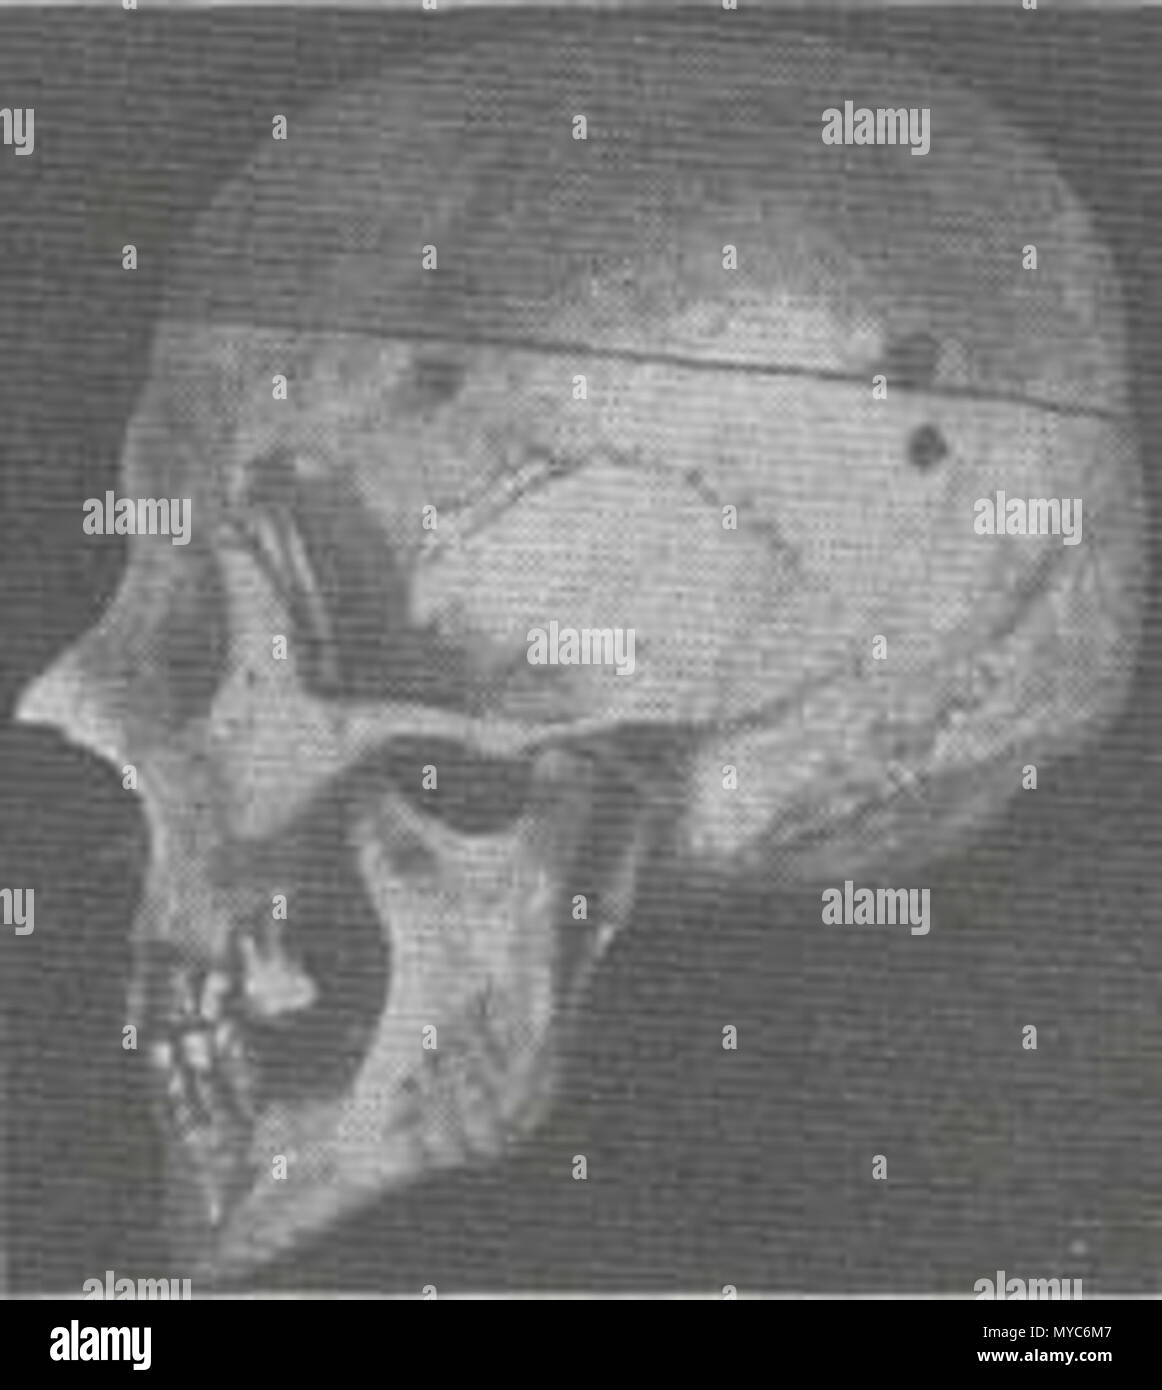 . English: Dinaric skull with especially marked Dinaric nose, and especially steep back to the head. 1927. Hans F.K. Gunther and the German Federal Archives 141 Dinaric Skull type Stock Photo